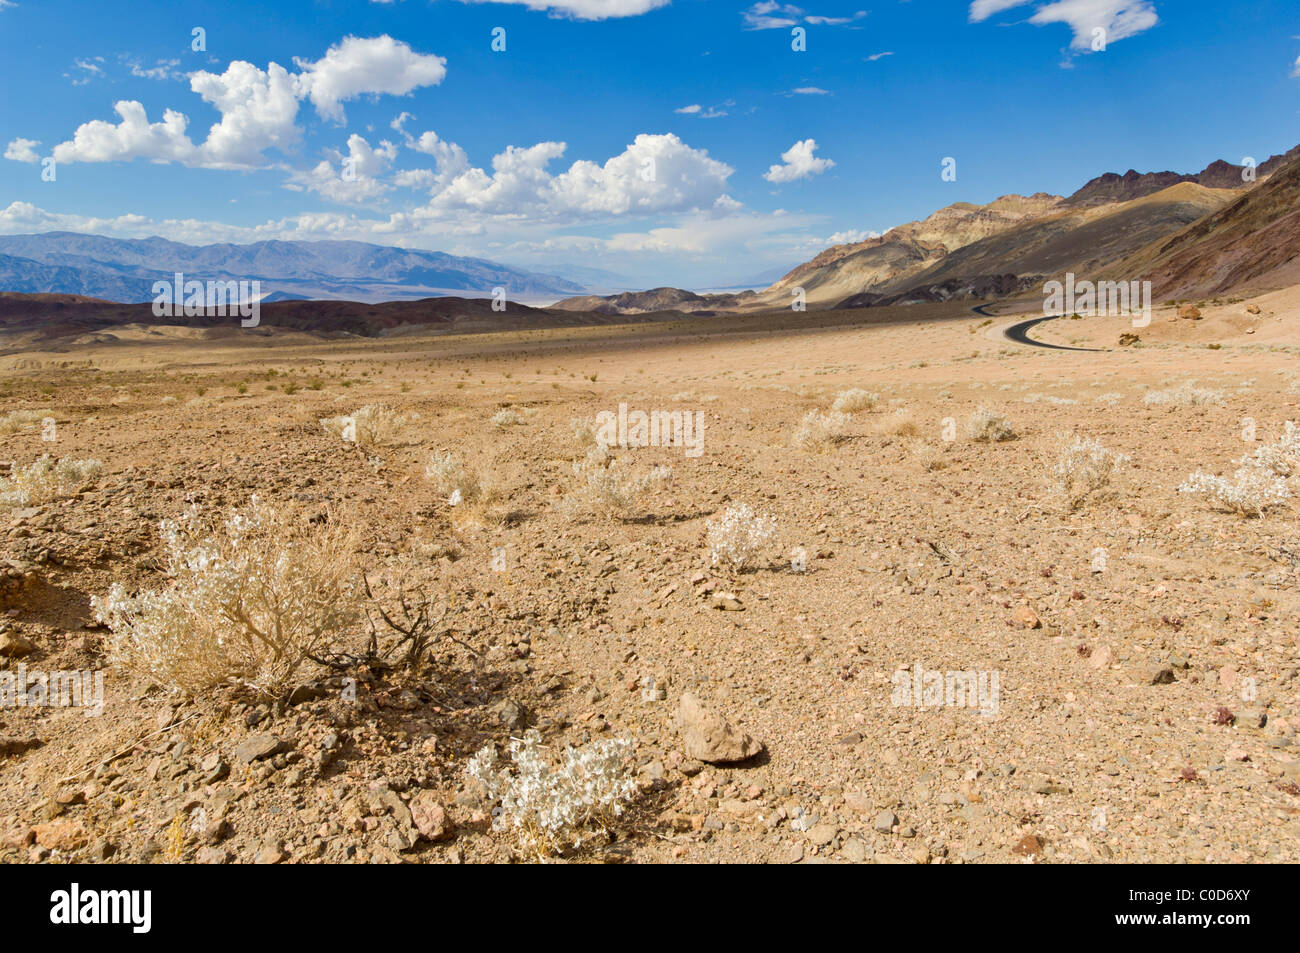 Arrid landscape of the foothills of the Black mountains, Artist's Drive, Death Valley national Park, California, USA Stock Photo